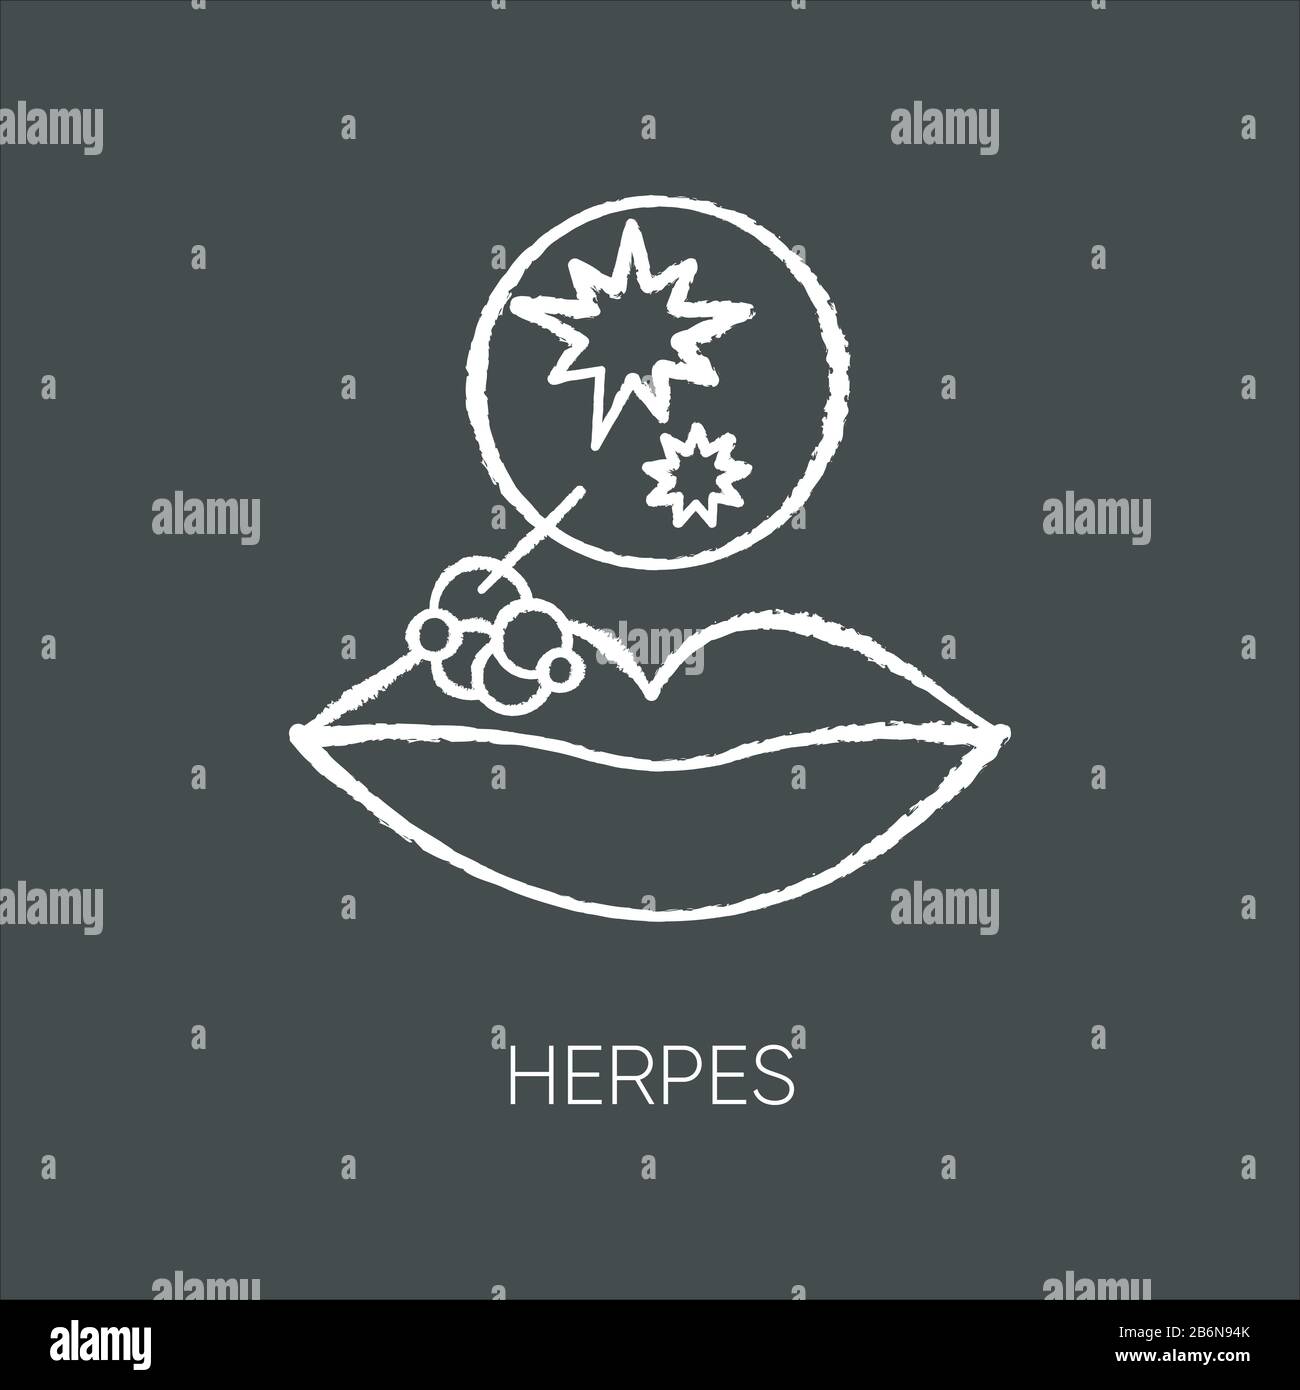 Herpes chalk white icon on black background. Viral skin infection, contagious STD, sexually transmitted disease. Lips with swollen blisters, rash Stock Vector